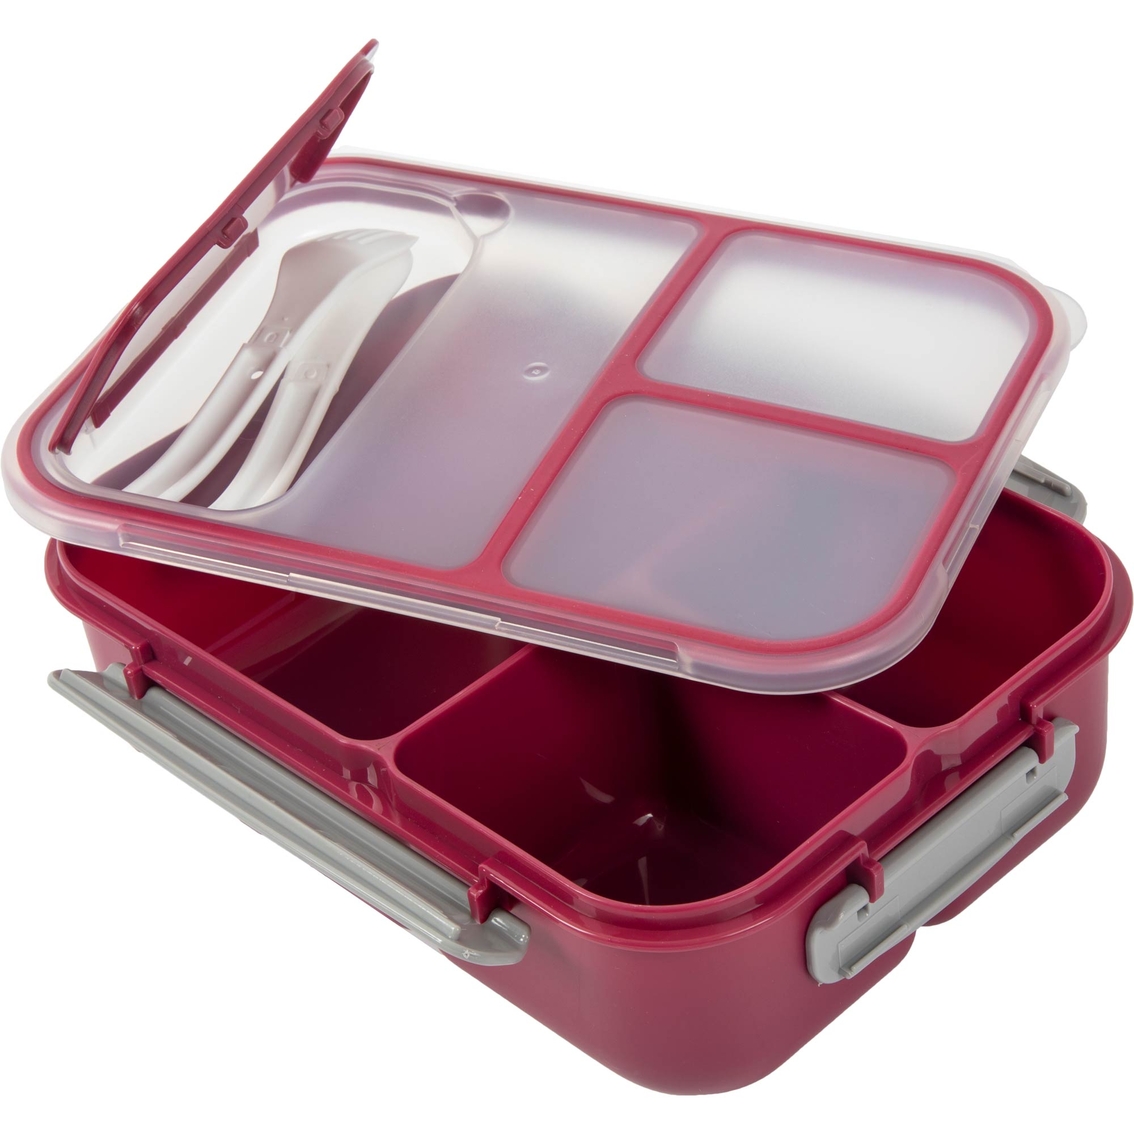 Spice by Tia Mowry Spicy Thyme 10 in. Lunch Kit with Folding Fork and Spoon - Image 2 of 2